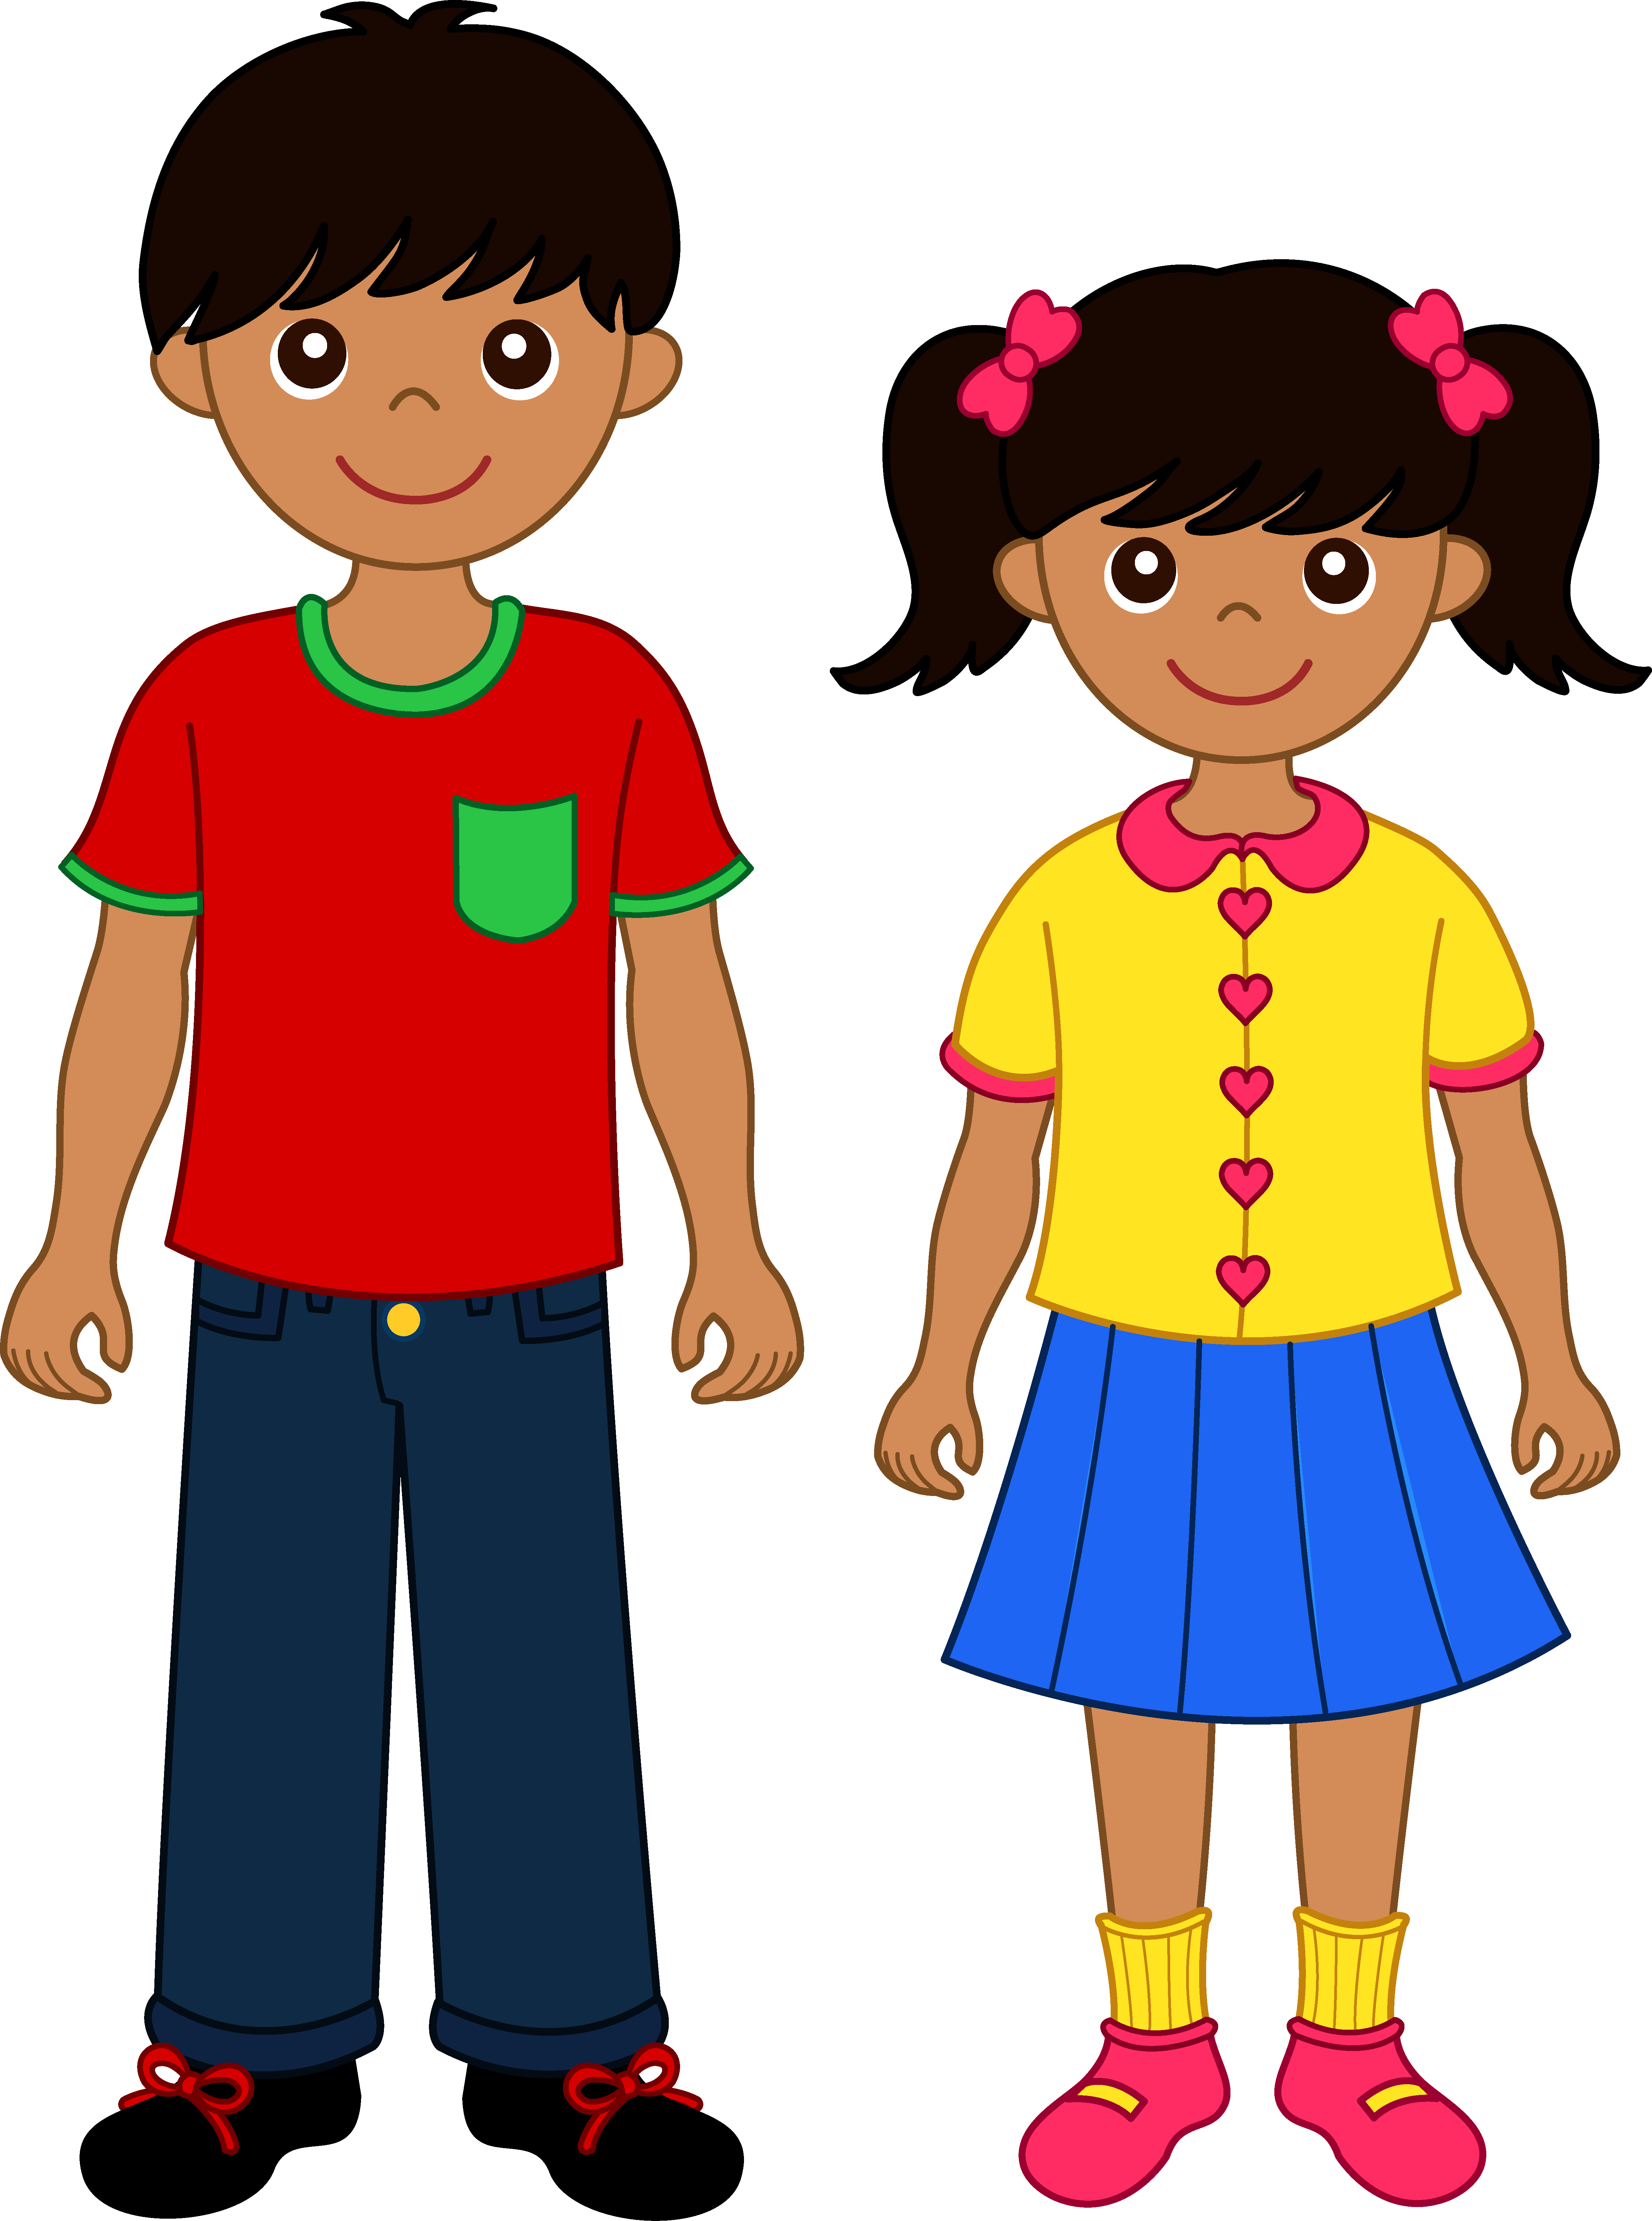 boy and girl fighting clipart - photo #19